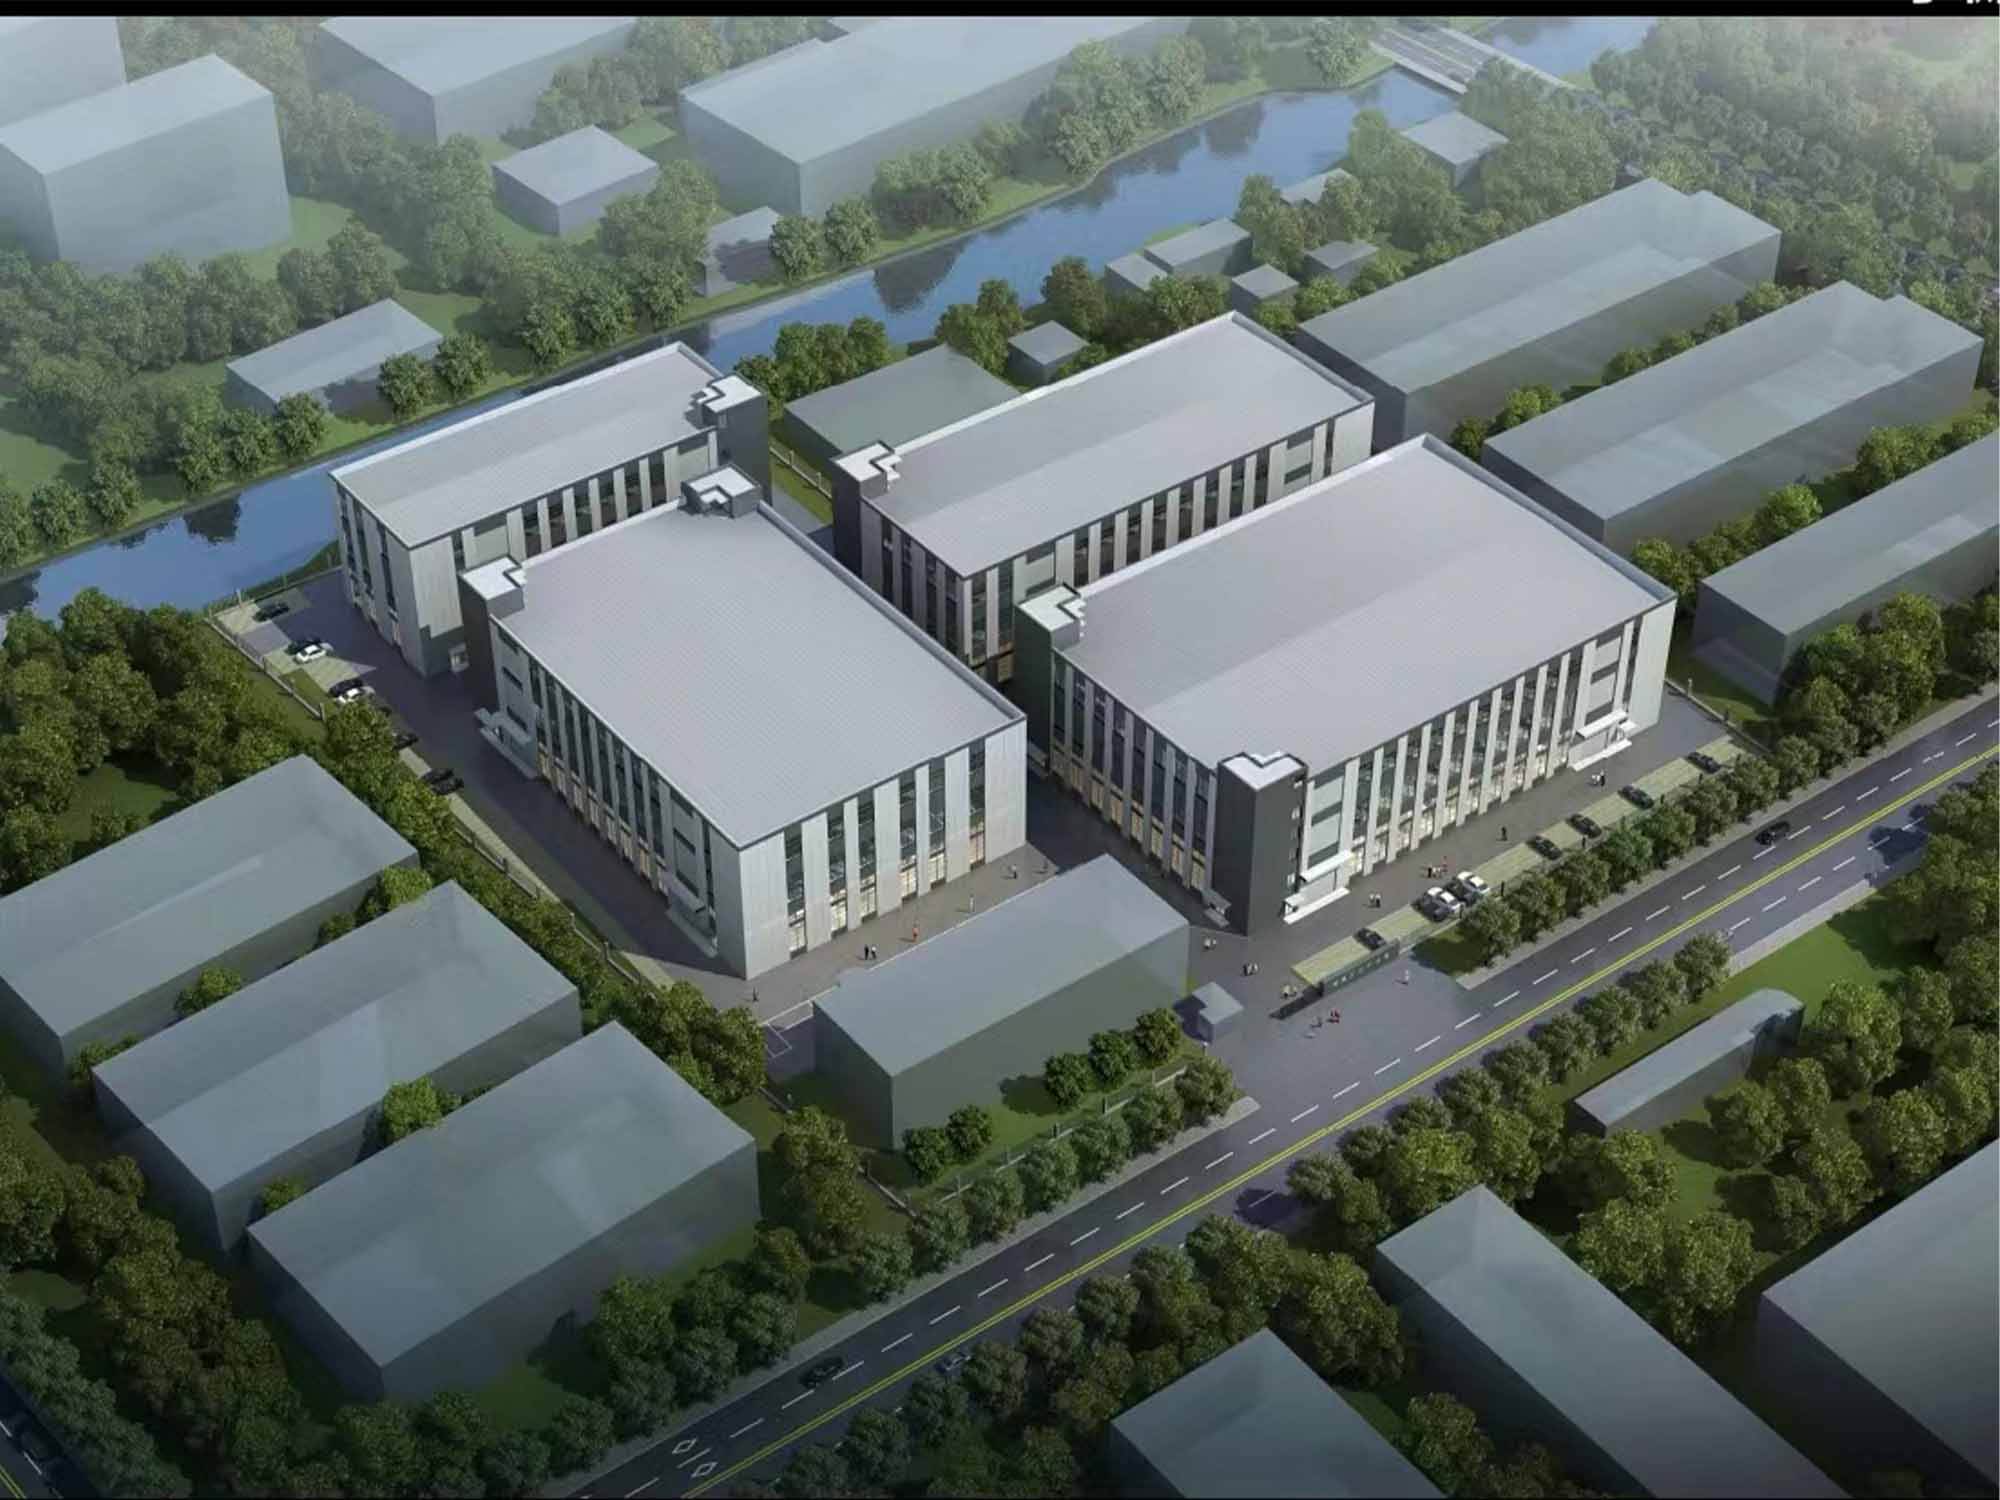 Taicang Puyuan Pharmaceutical Co., Ltd. invested about 30 million US dollars in the construction of fungicide, pesticide and pharmaceutical intermediates warehousing and logistics project in Suzhou, Jiangsu Province, China